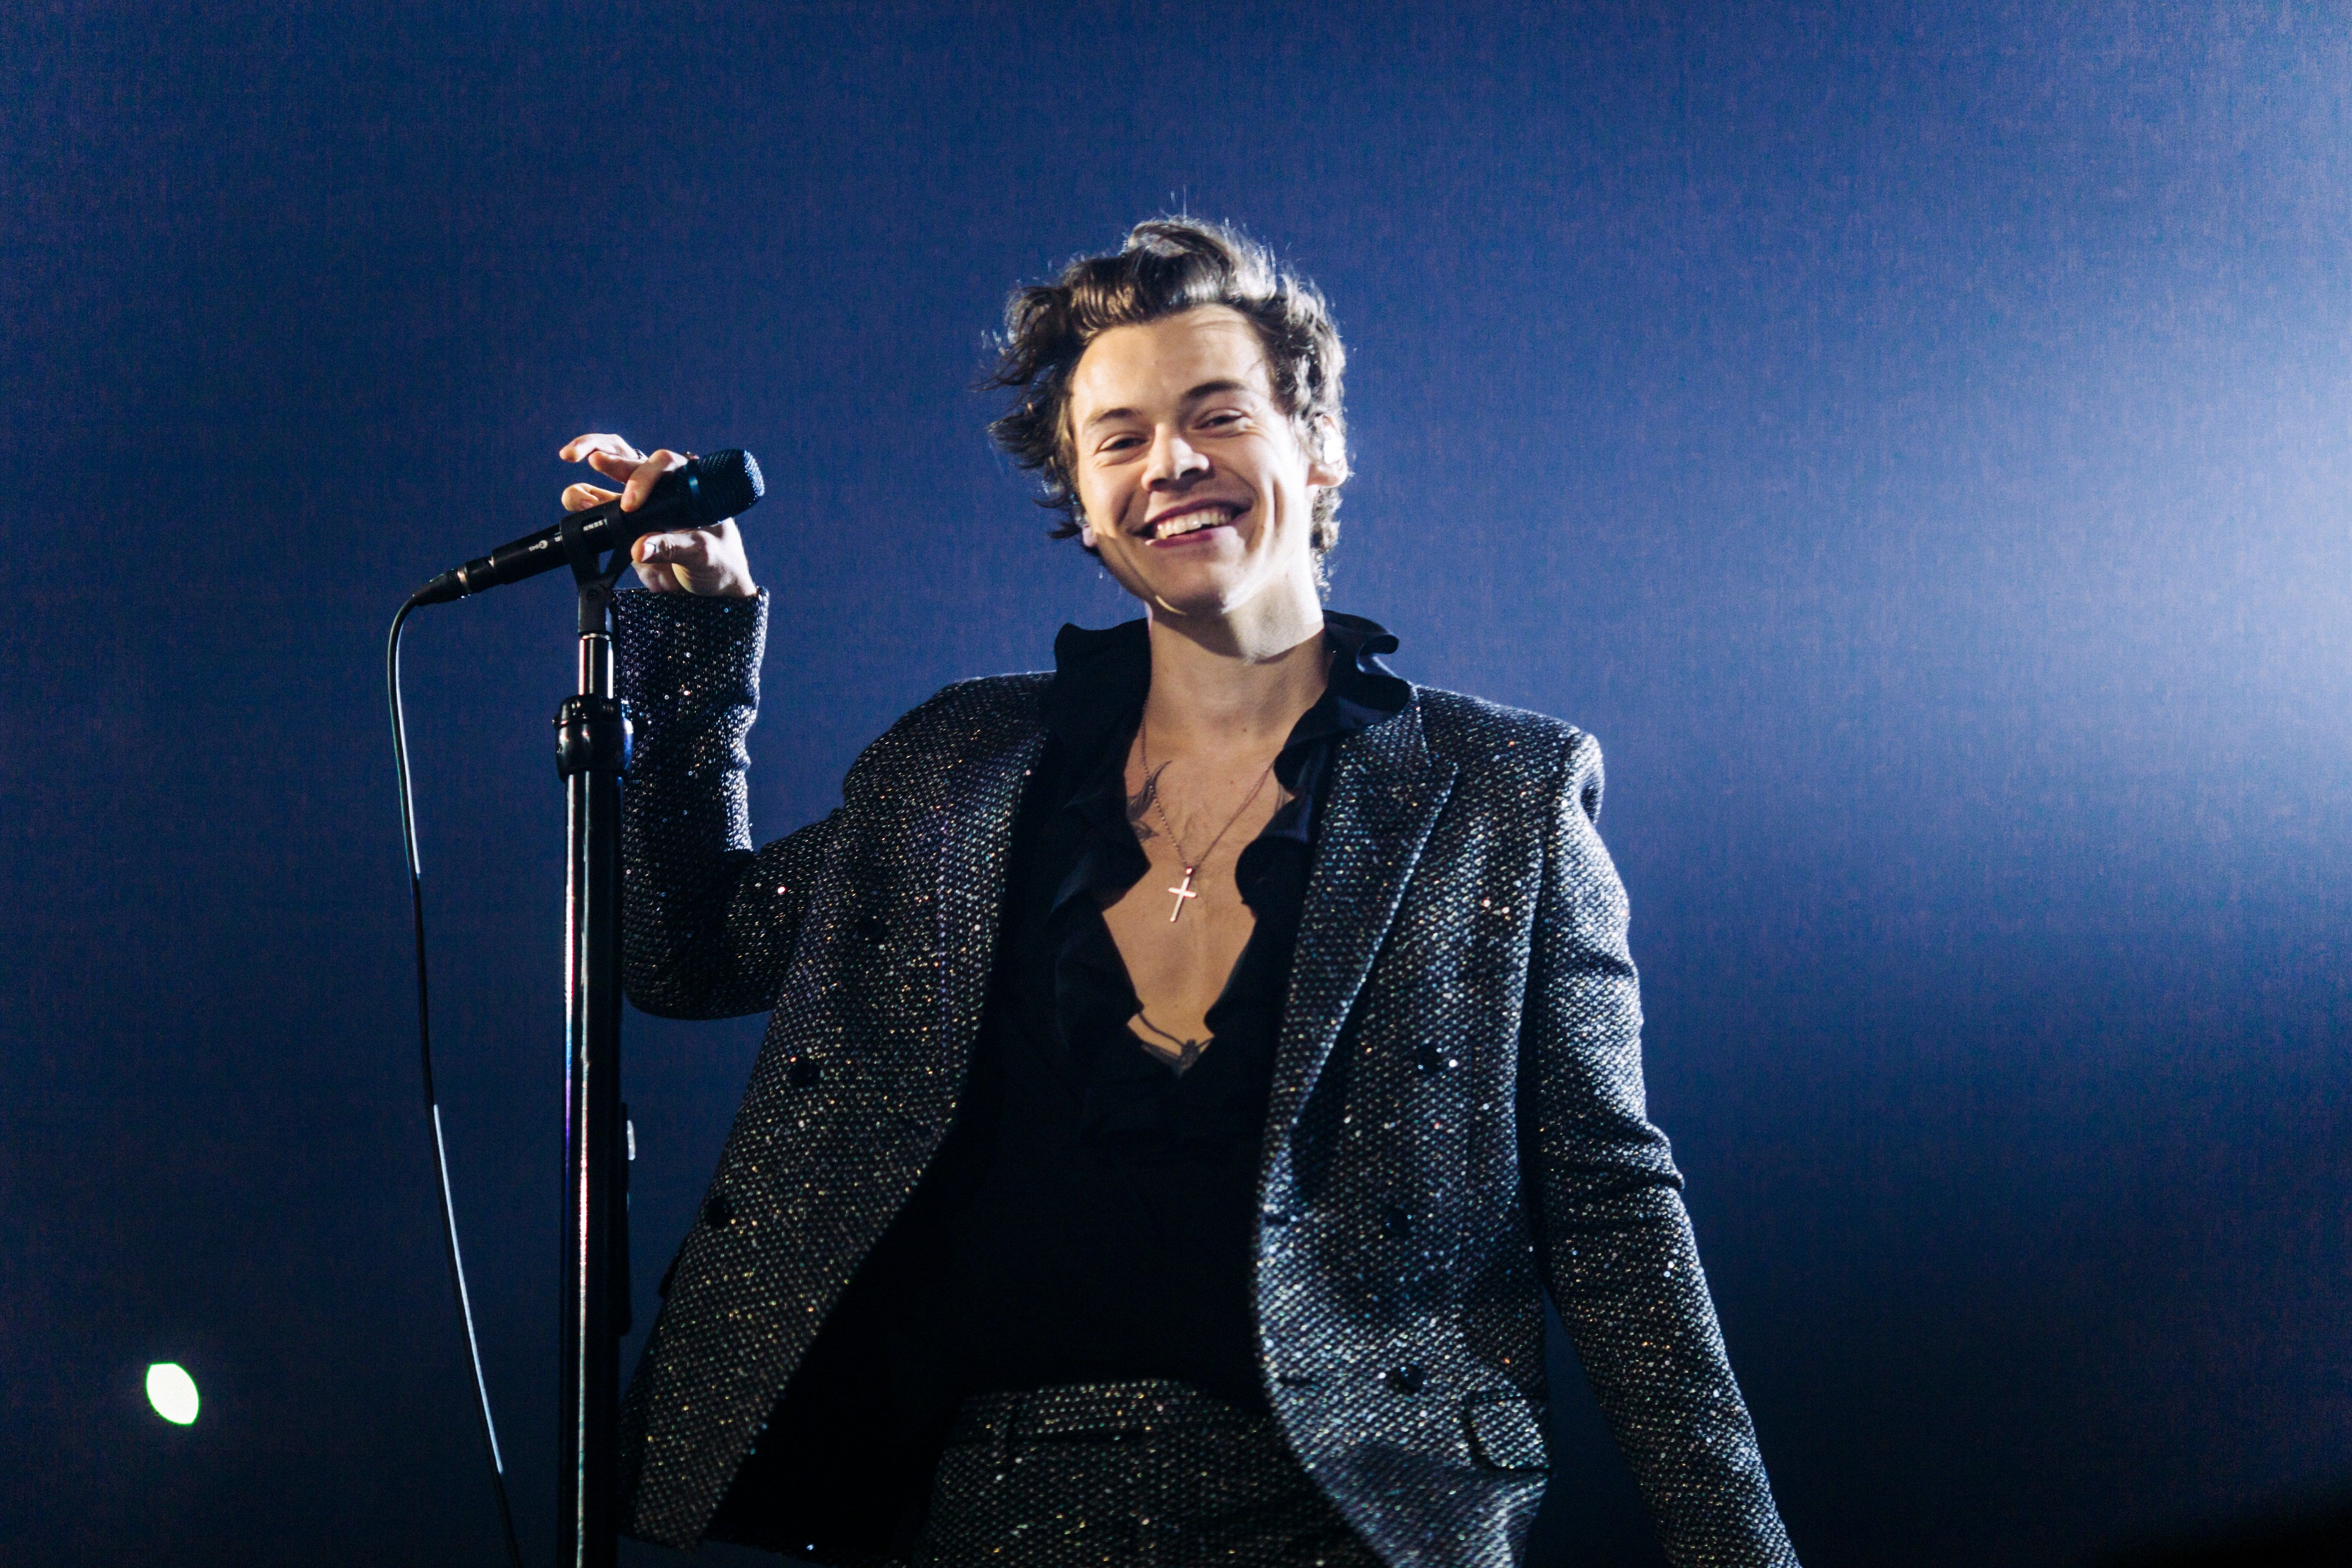 Harry Styles Fans Think His Next Music Video Will Feature Phoebe Waller Bridge